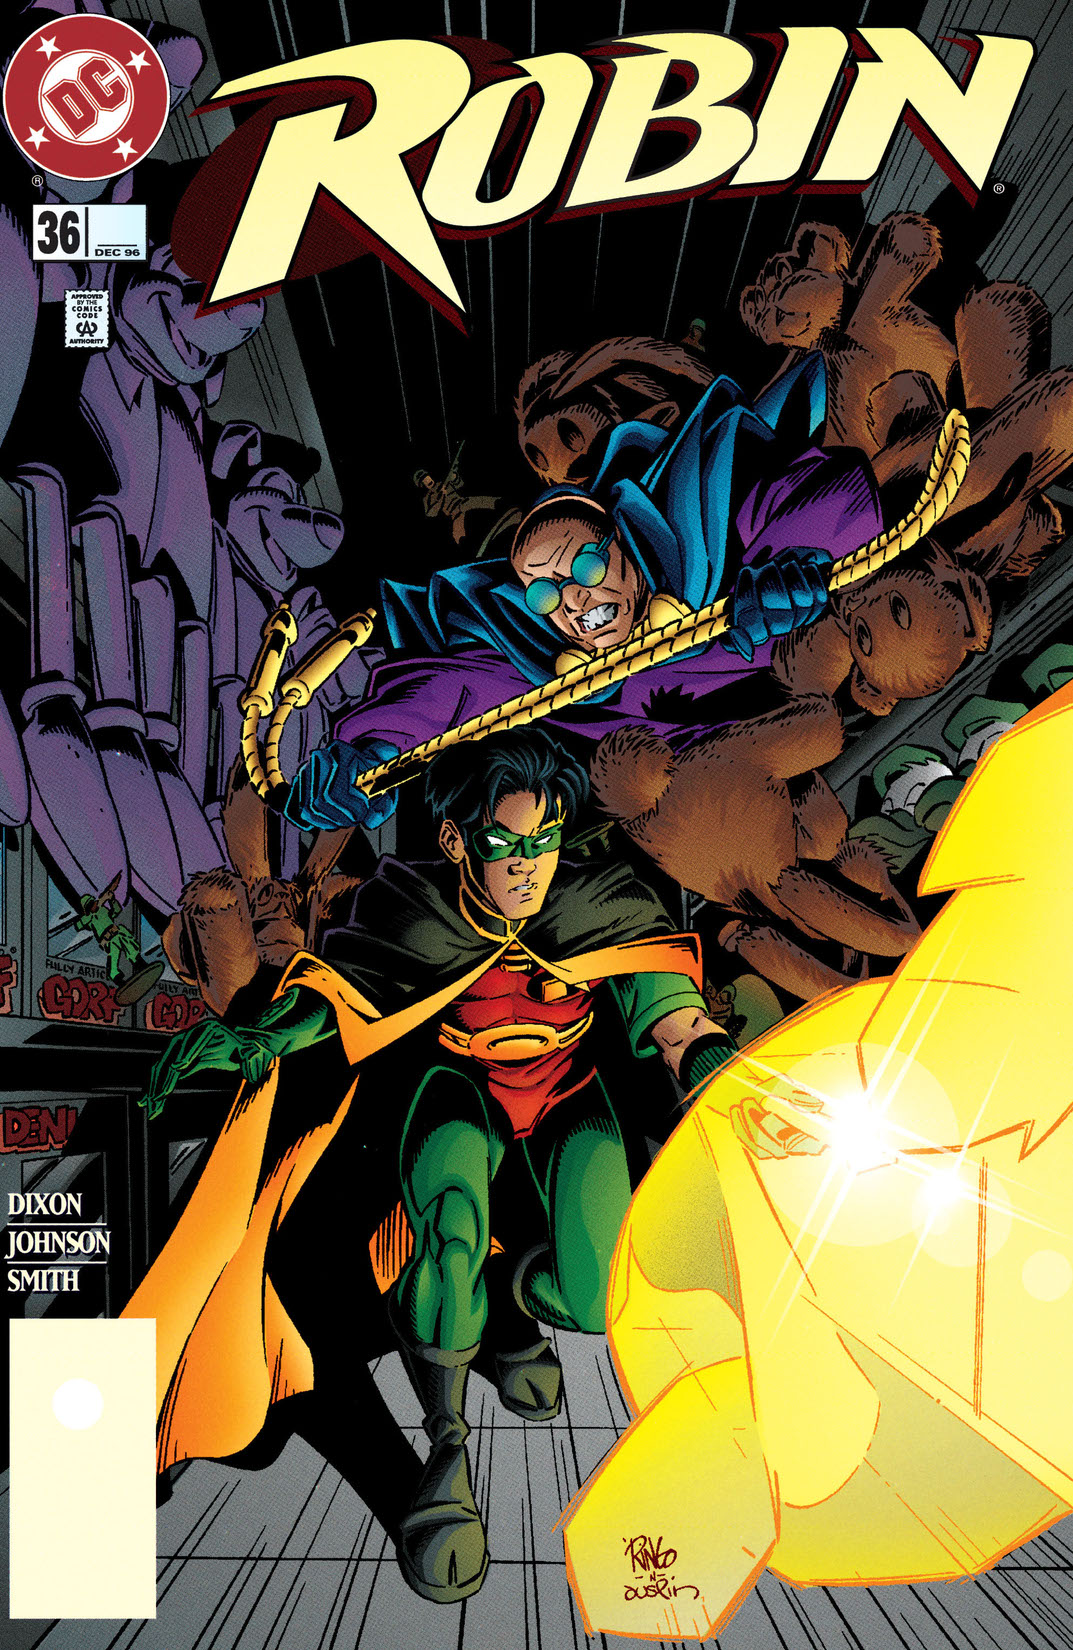 Robin (1993-) #36 preview images